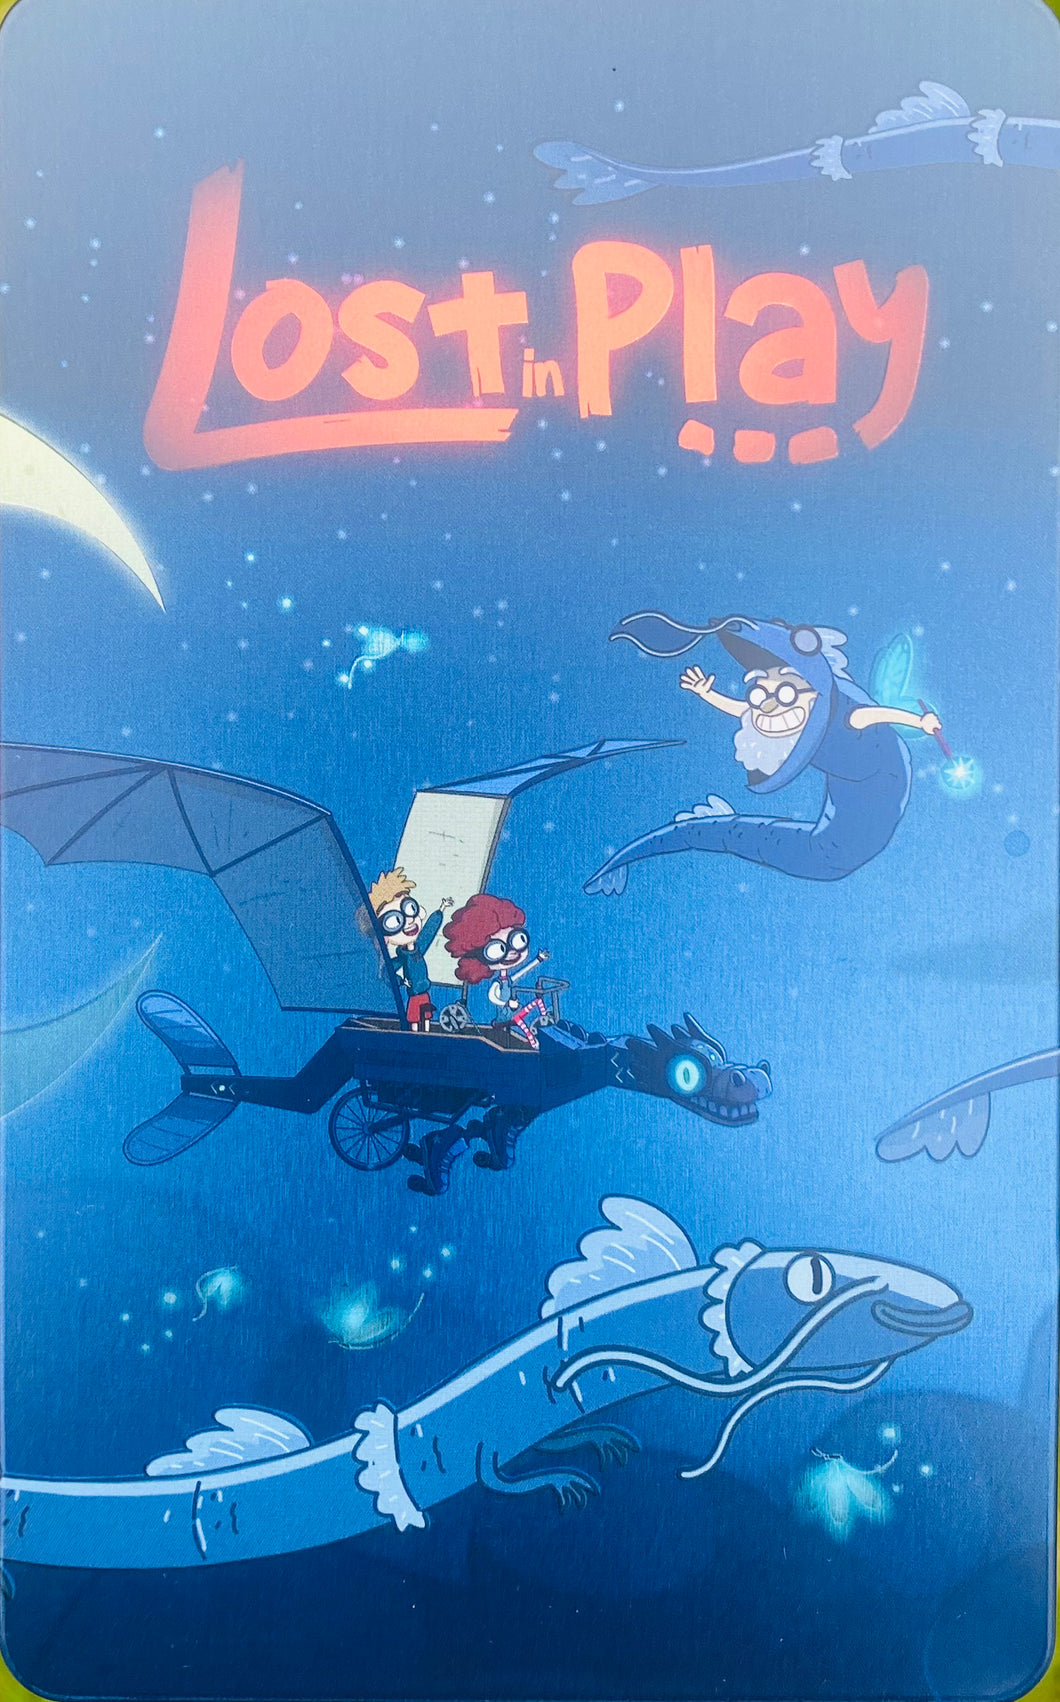 Lost in play steelbook / Super rare games / Switch